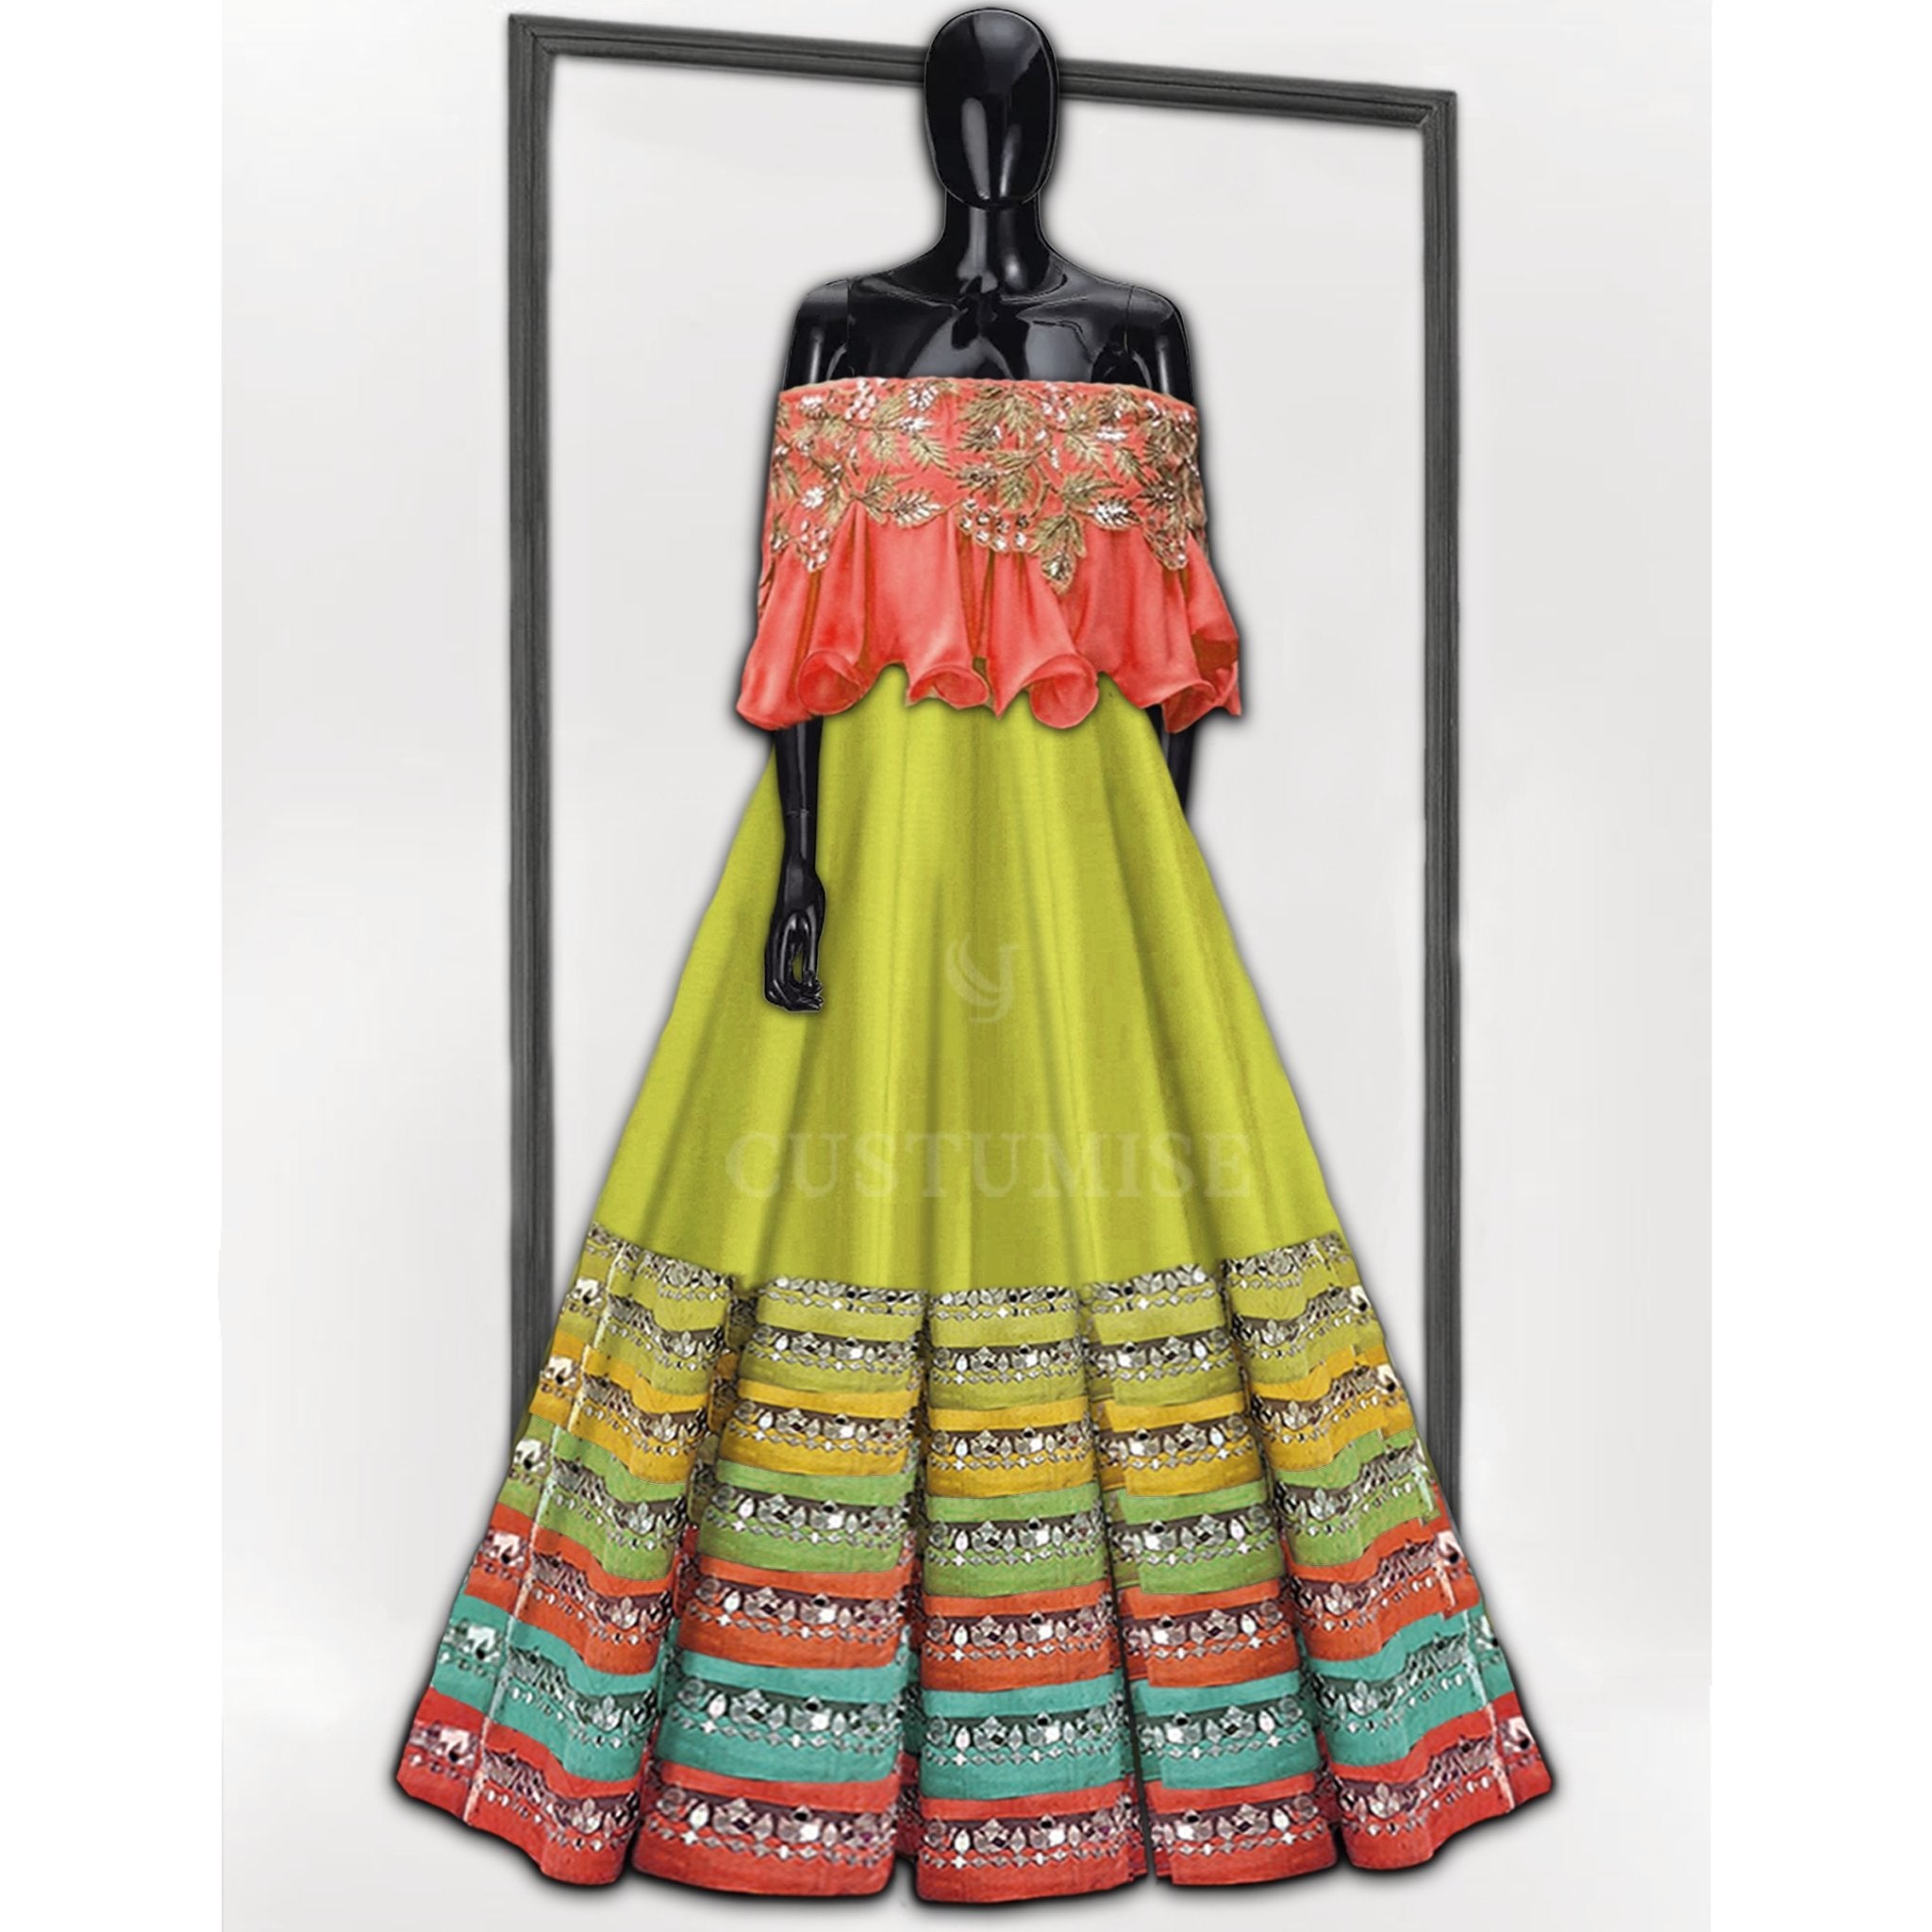 Lime Green and Coral Mirror Skirt Set - Indian Designer Bridal Wedding Outfit